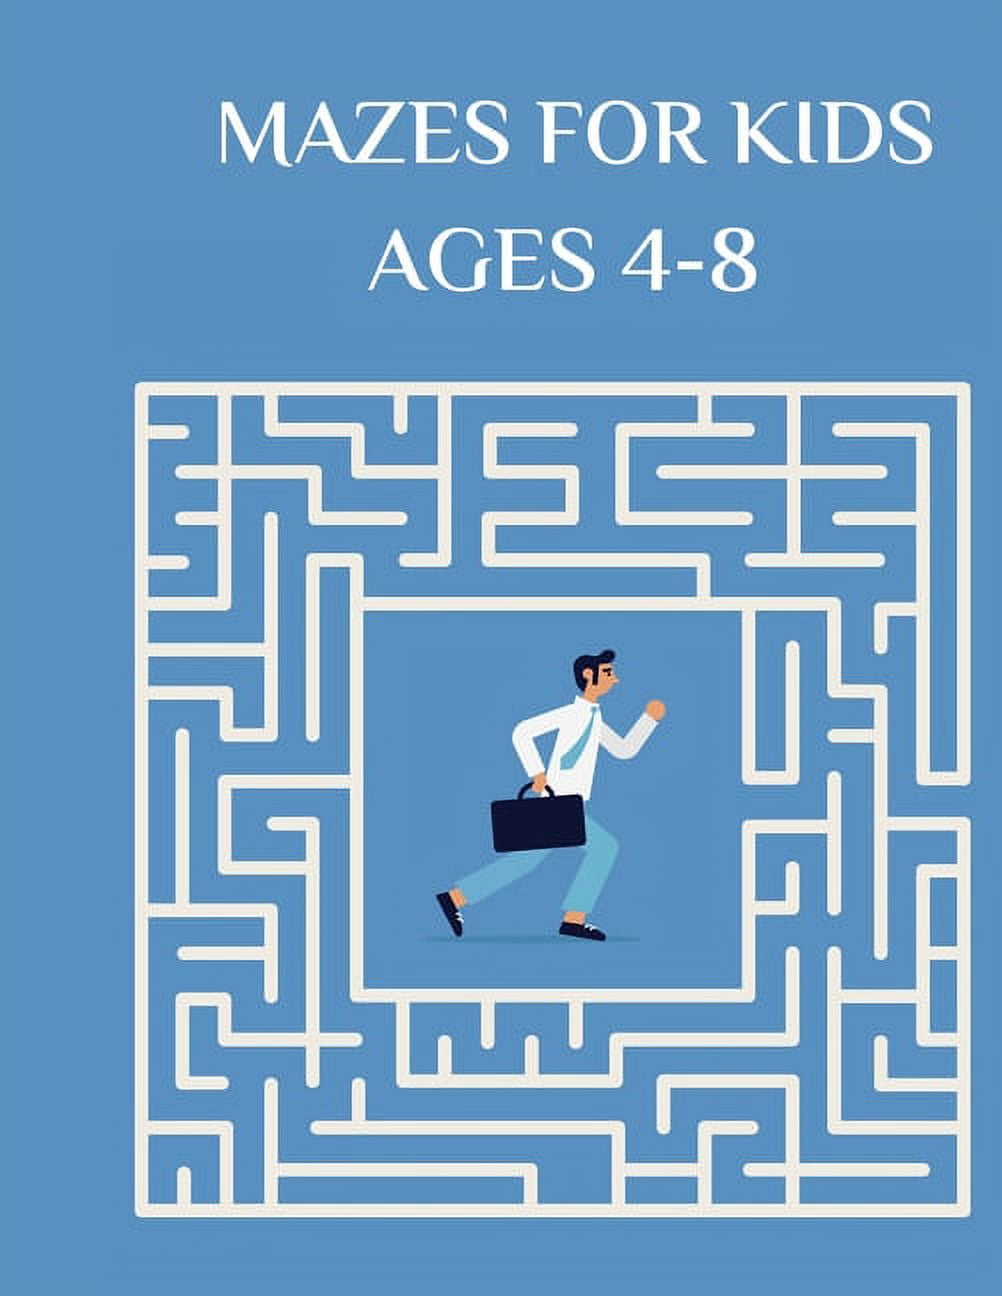 Mazes for Kids Ages 4-8: Maze Activity Book - 4-6, 6-8 - Workbook for Games, Puzzles, and Problem-Solving [Book]